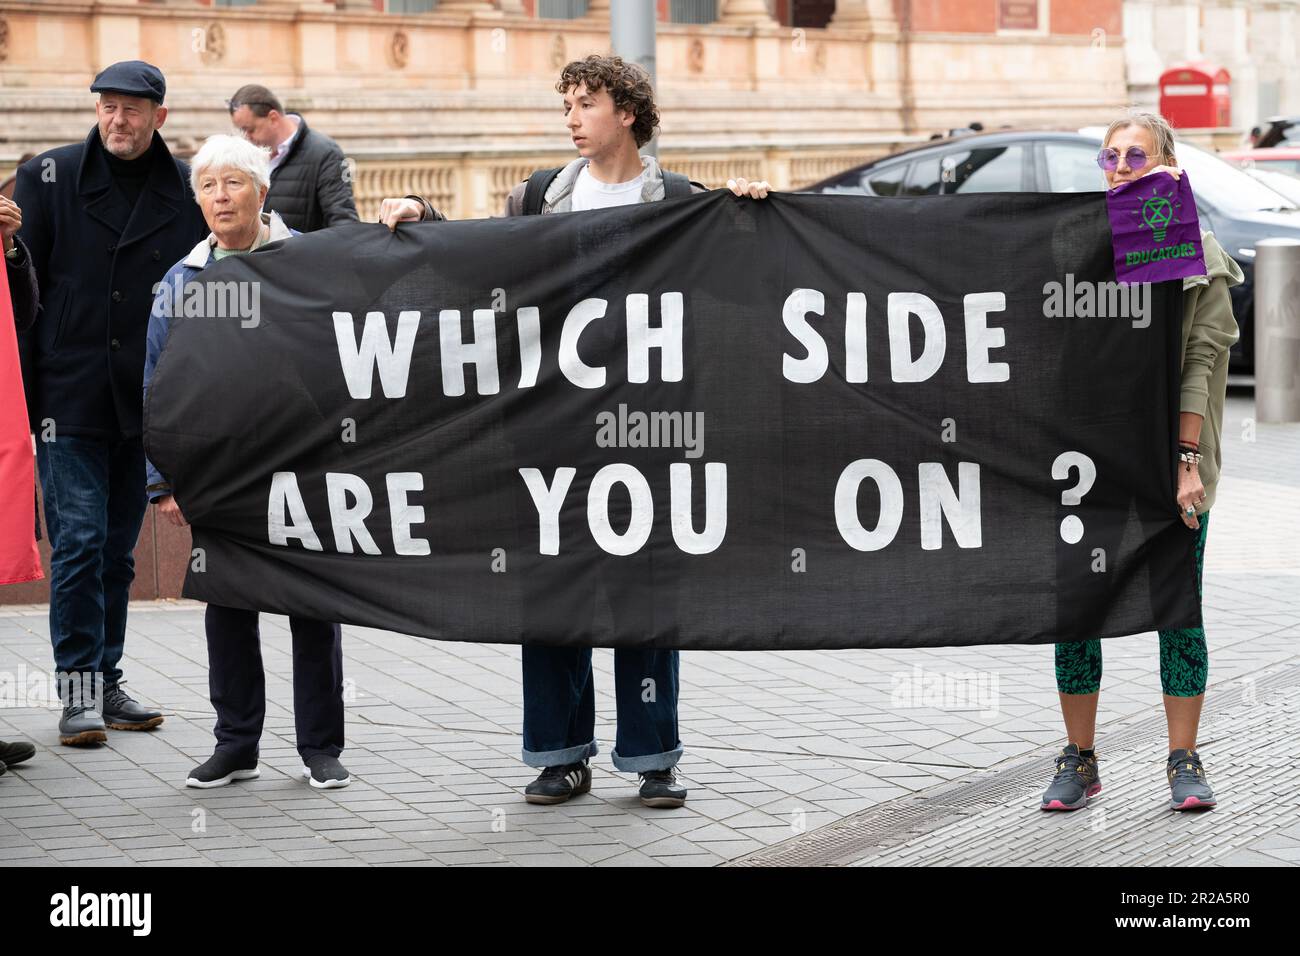 Climate activists hold a banner asking 'Which Side Are You On' during a protest against fossil fuel sponsorship of London's Science Museum. Stock Photo